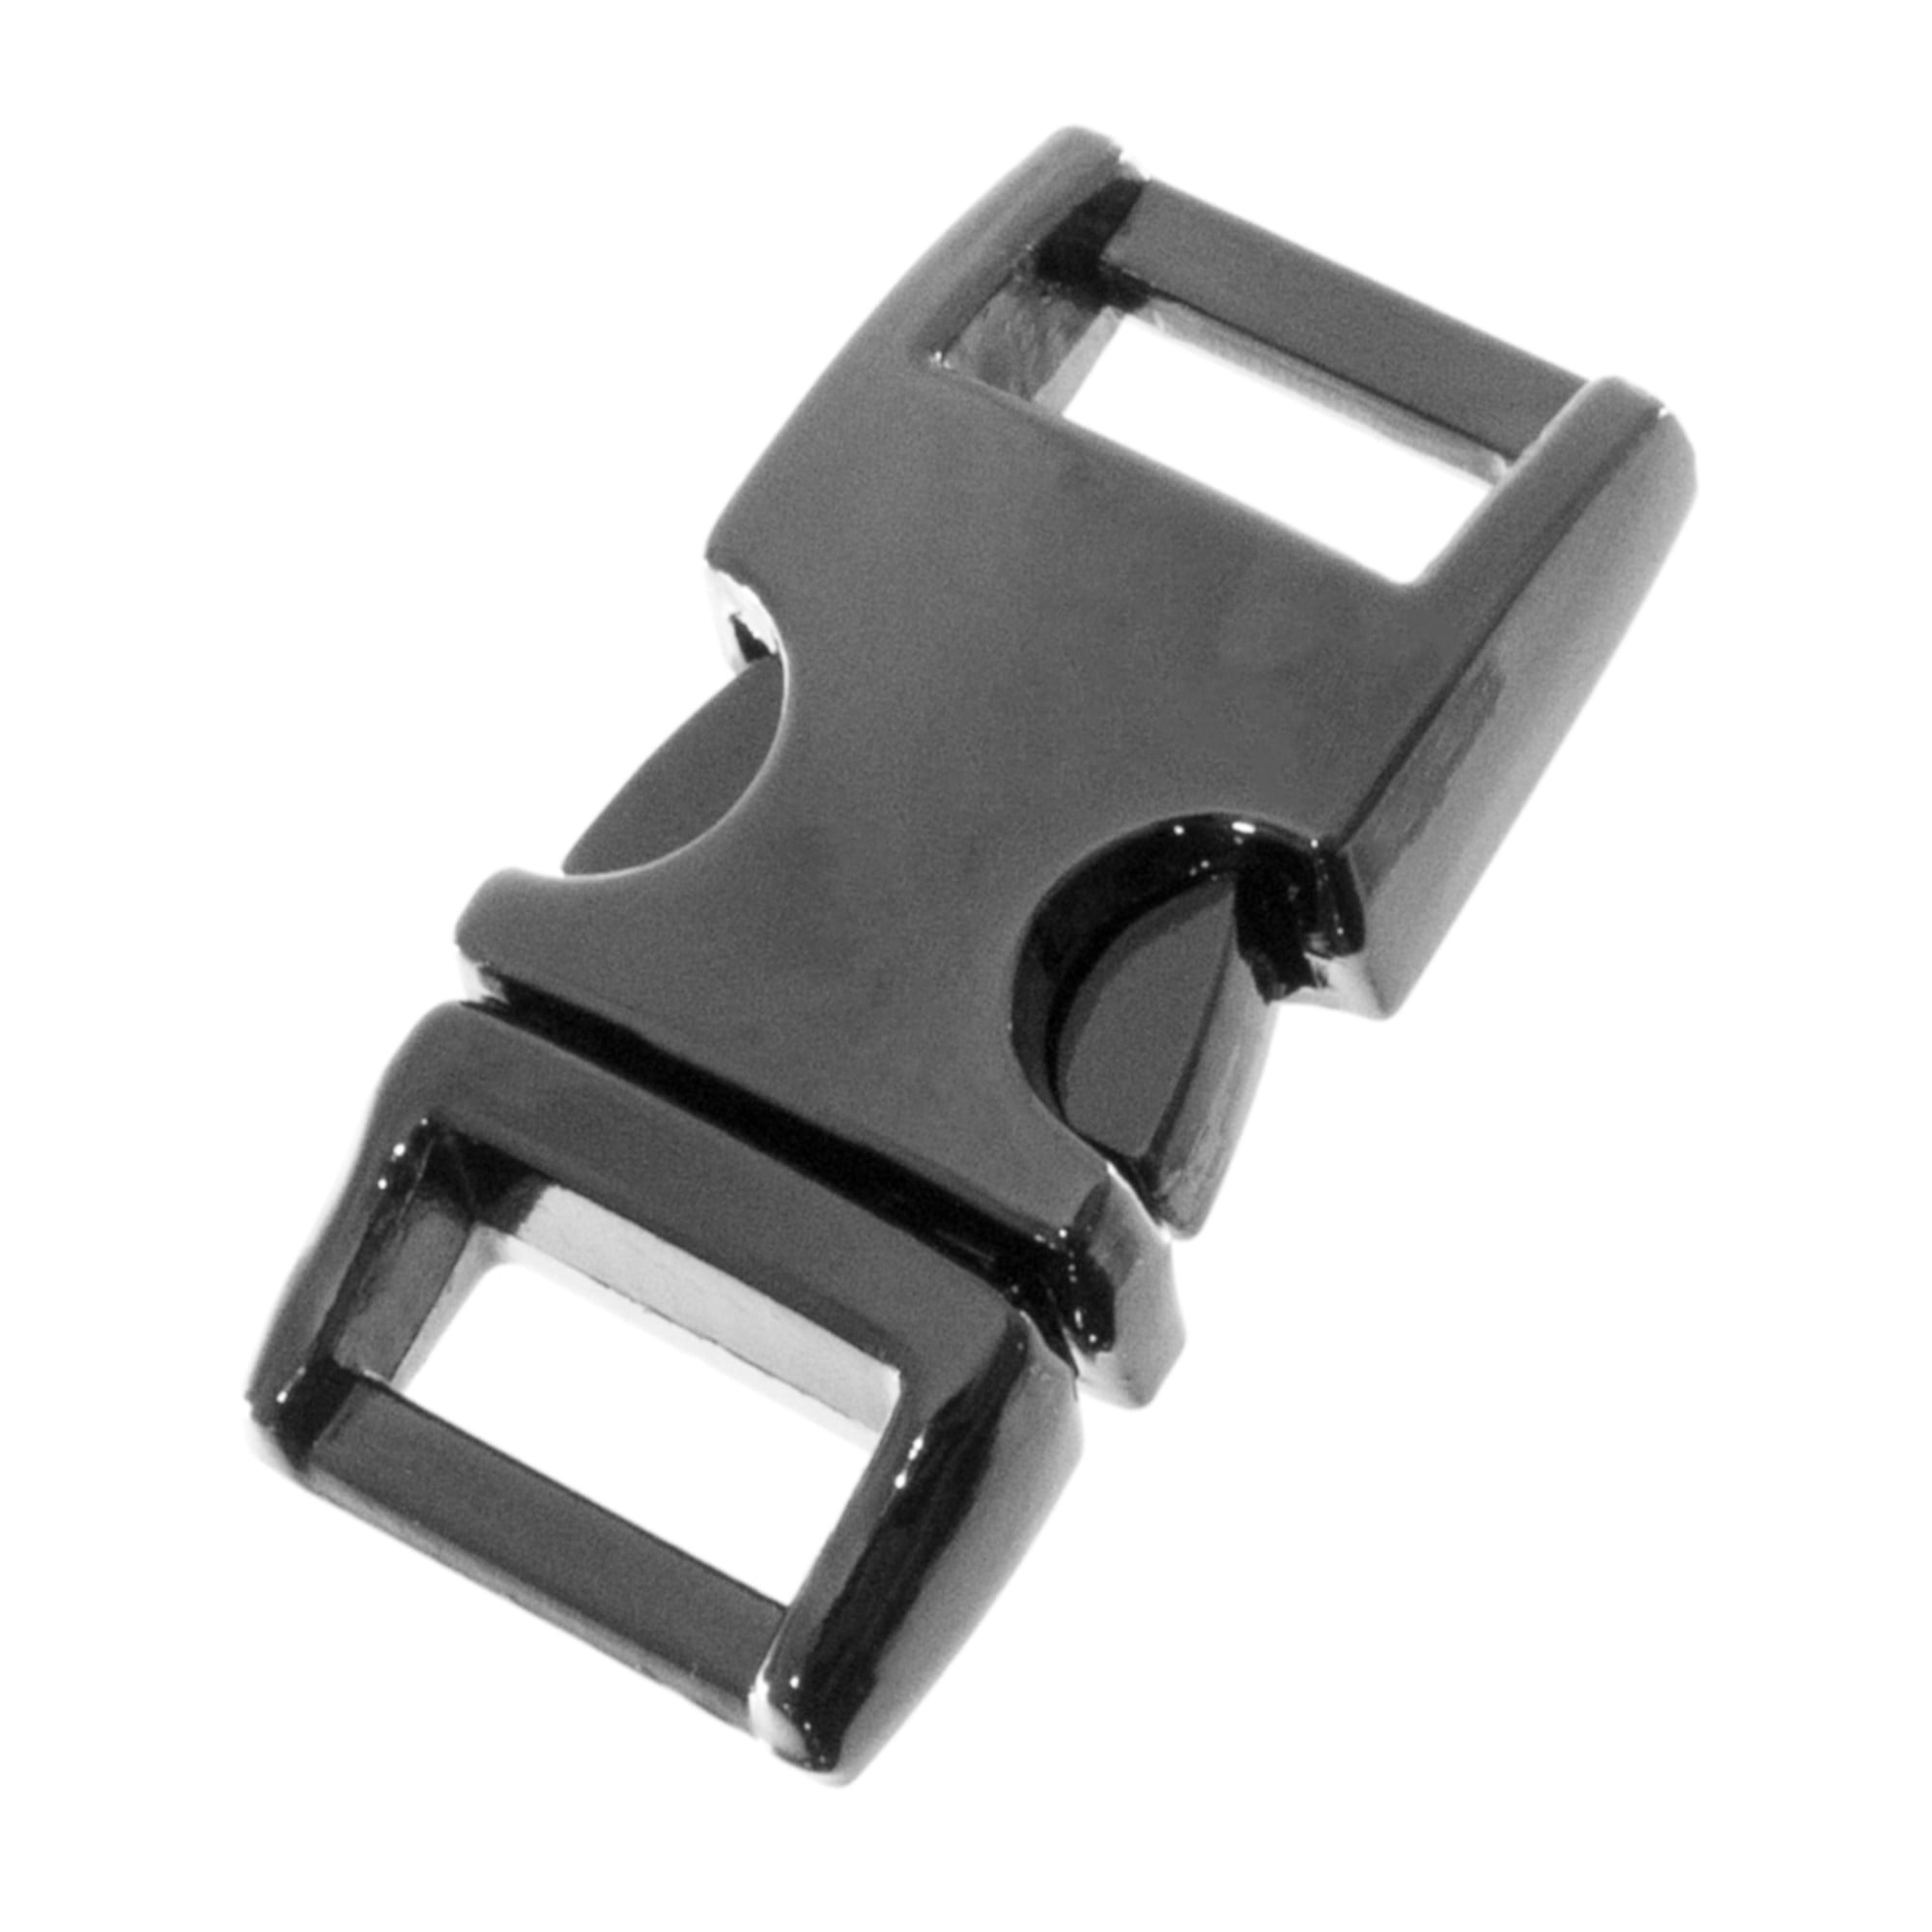 Metal Side Release Buckles 3/4 inch 20 mm Black Tactical Buckles for DIY Backpack Bag Replace Buckles Hand Craft Accessories 